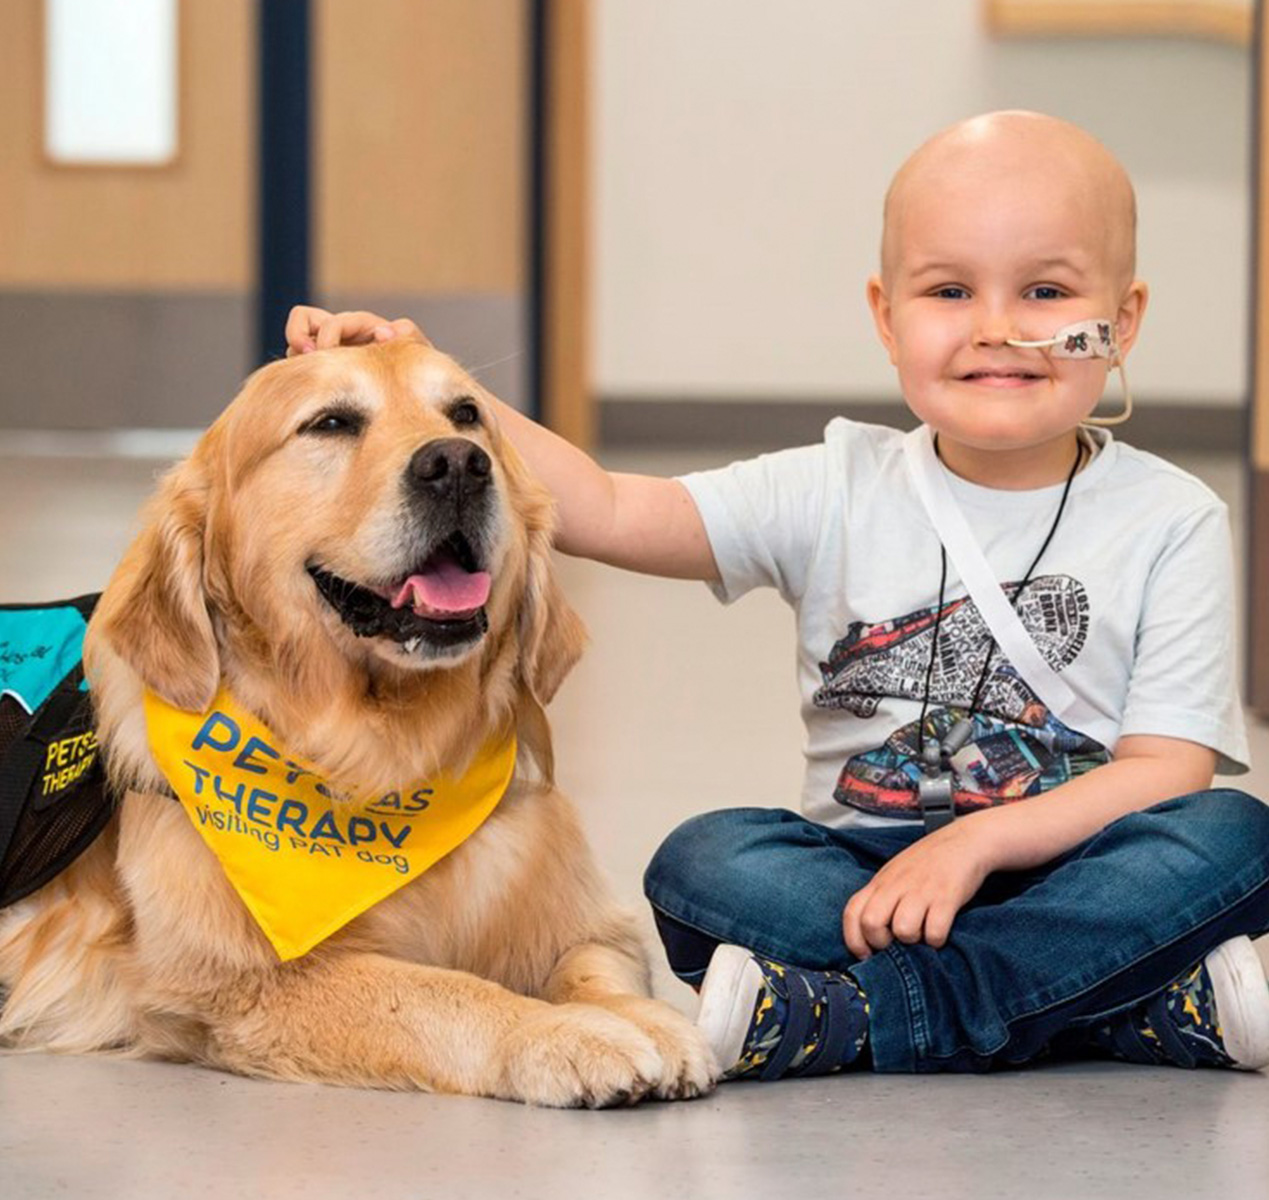 A therapy dog led down next to a small child.